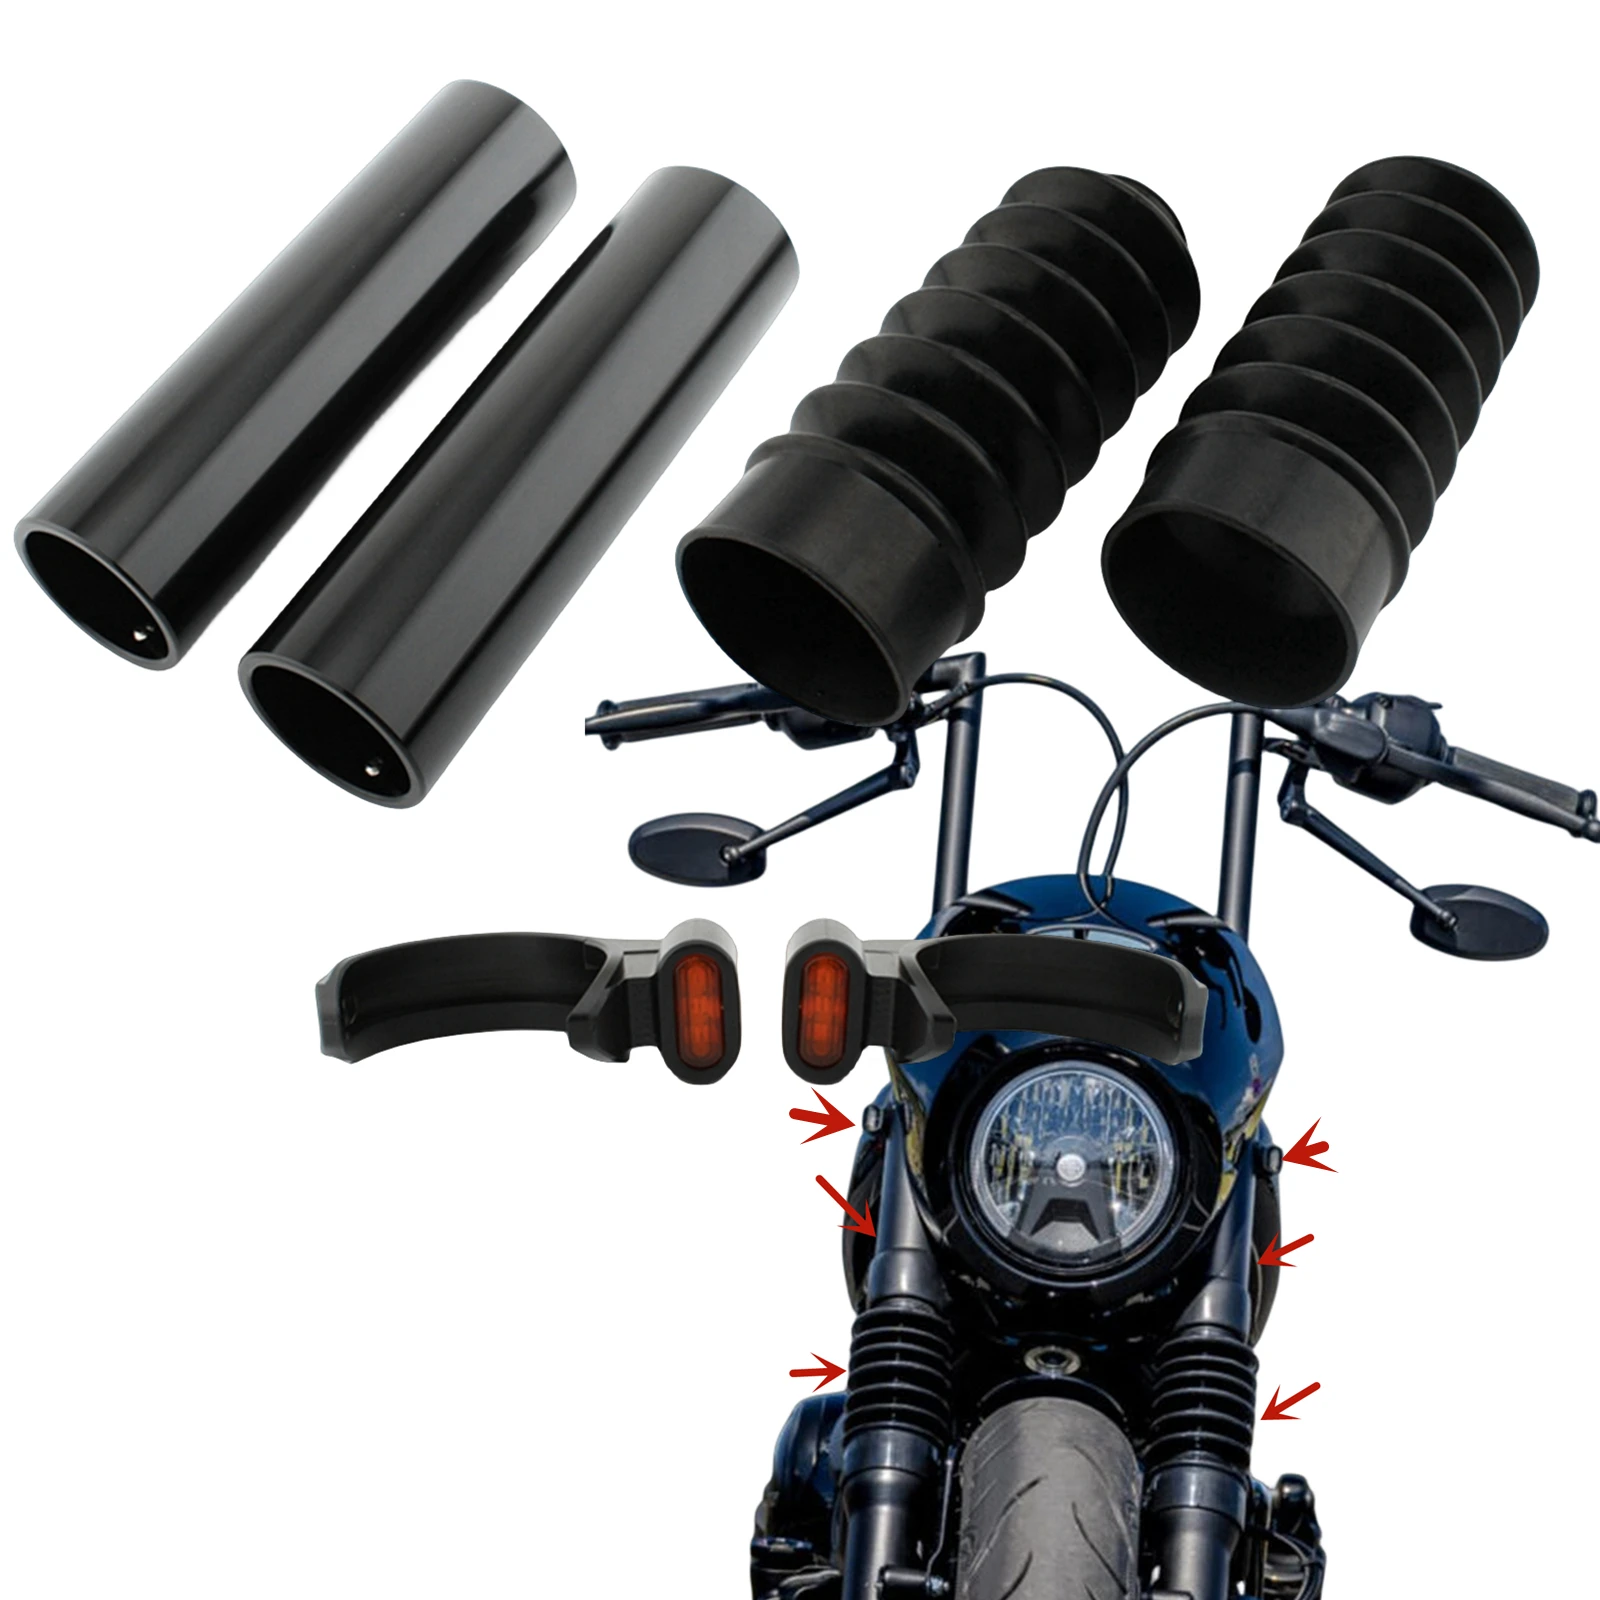 

For Harley Nightster 975 RH975 2022-2023 Motorcycle Front Fork Shock Rubber Dust Covers+Turn Signal Lamp Light